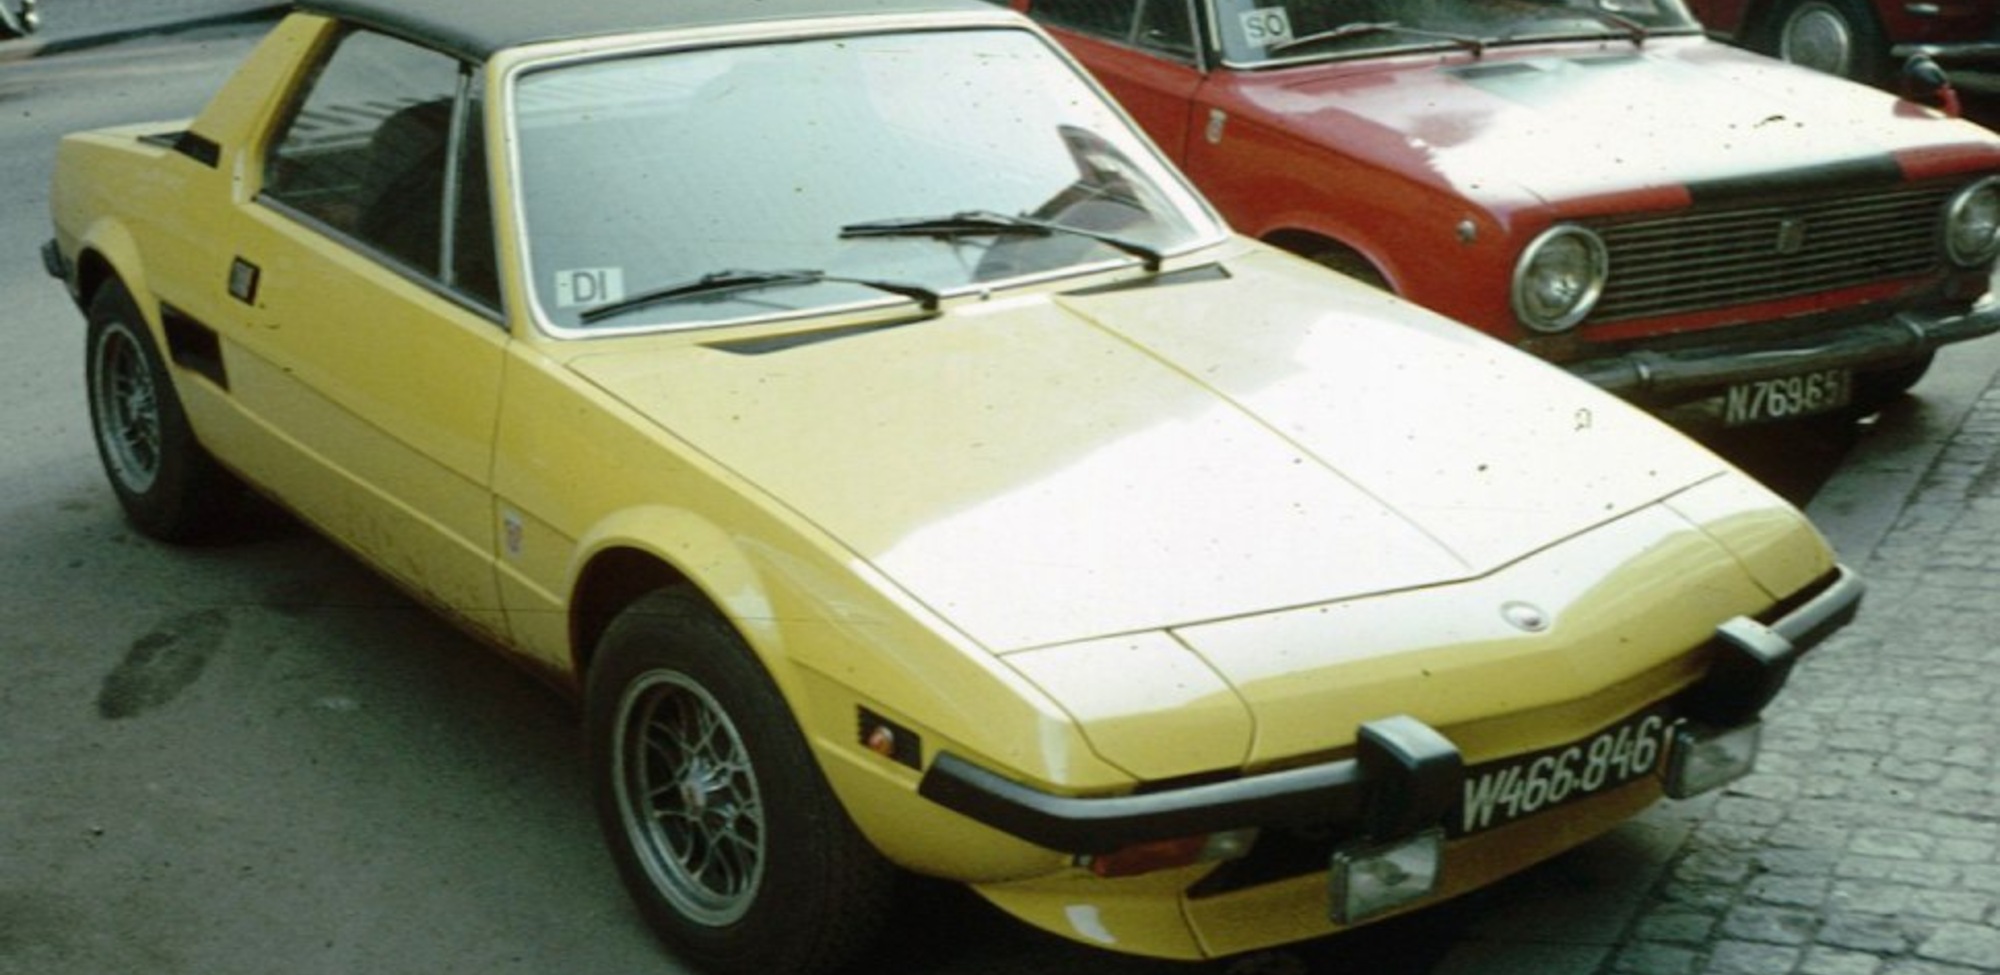 Fiat X 1/9 (128 AS) 1.3 Exclusiv Serie (75 Hp) 1973, 1974, 1975, 1976, 1977, 1978, 1979 